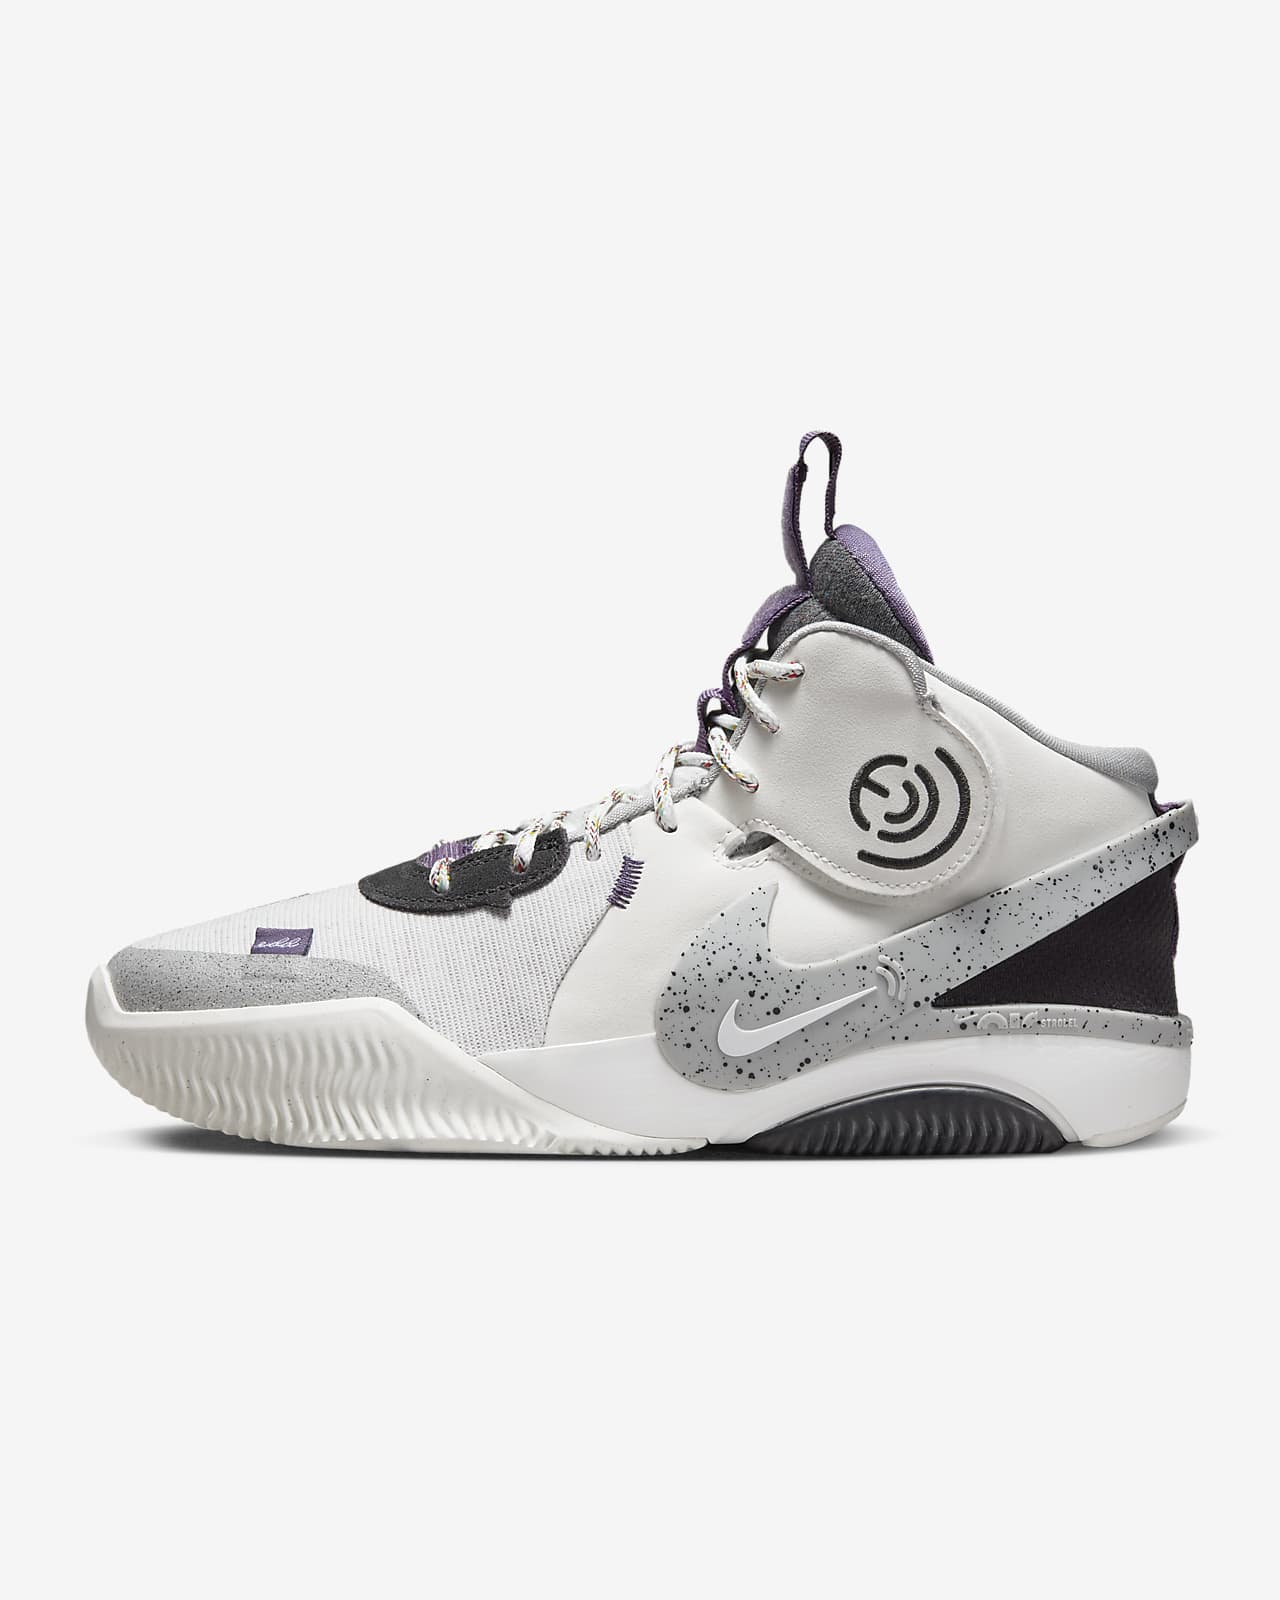 Nike Air Deldon 'Together We Fly' Basketball Shoes. Nike AT